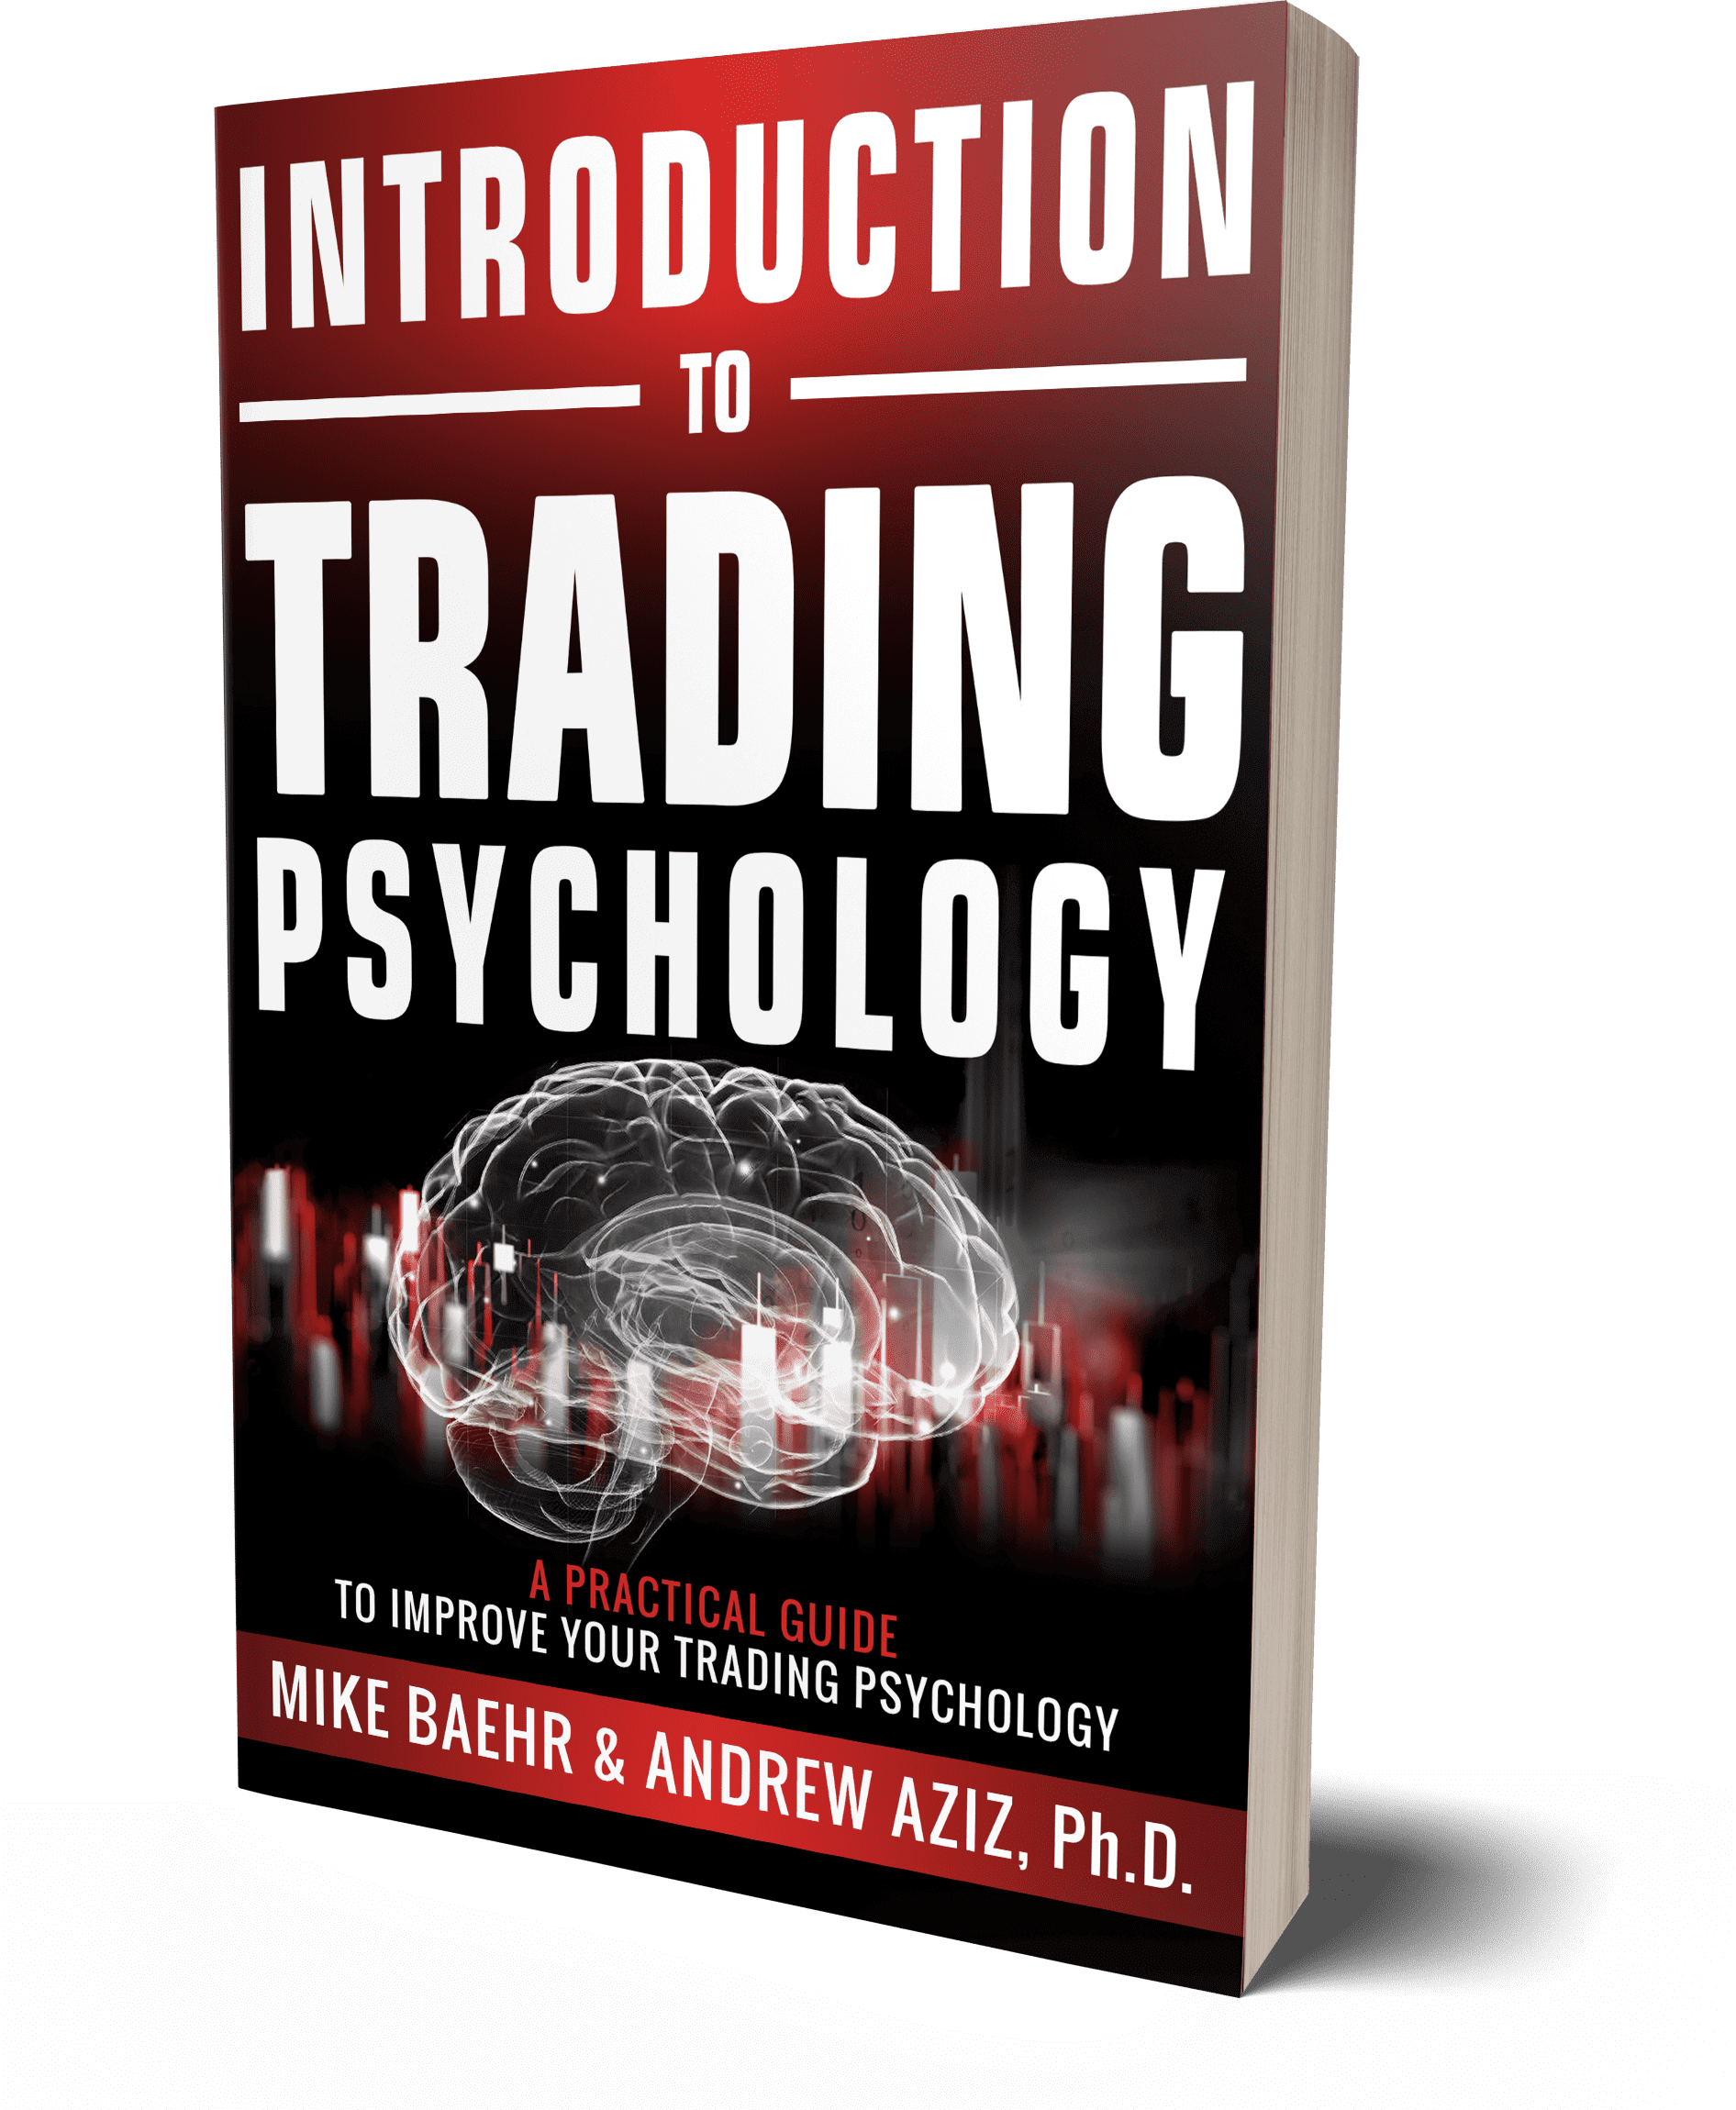 introduction to trading psychology book cover